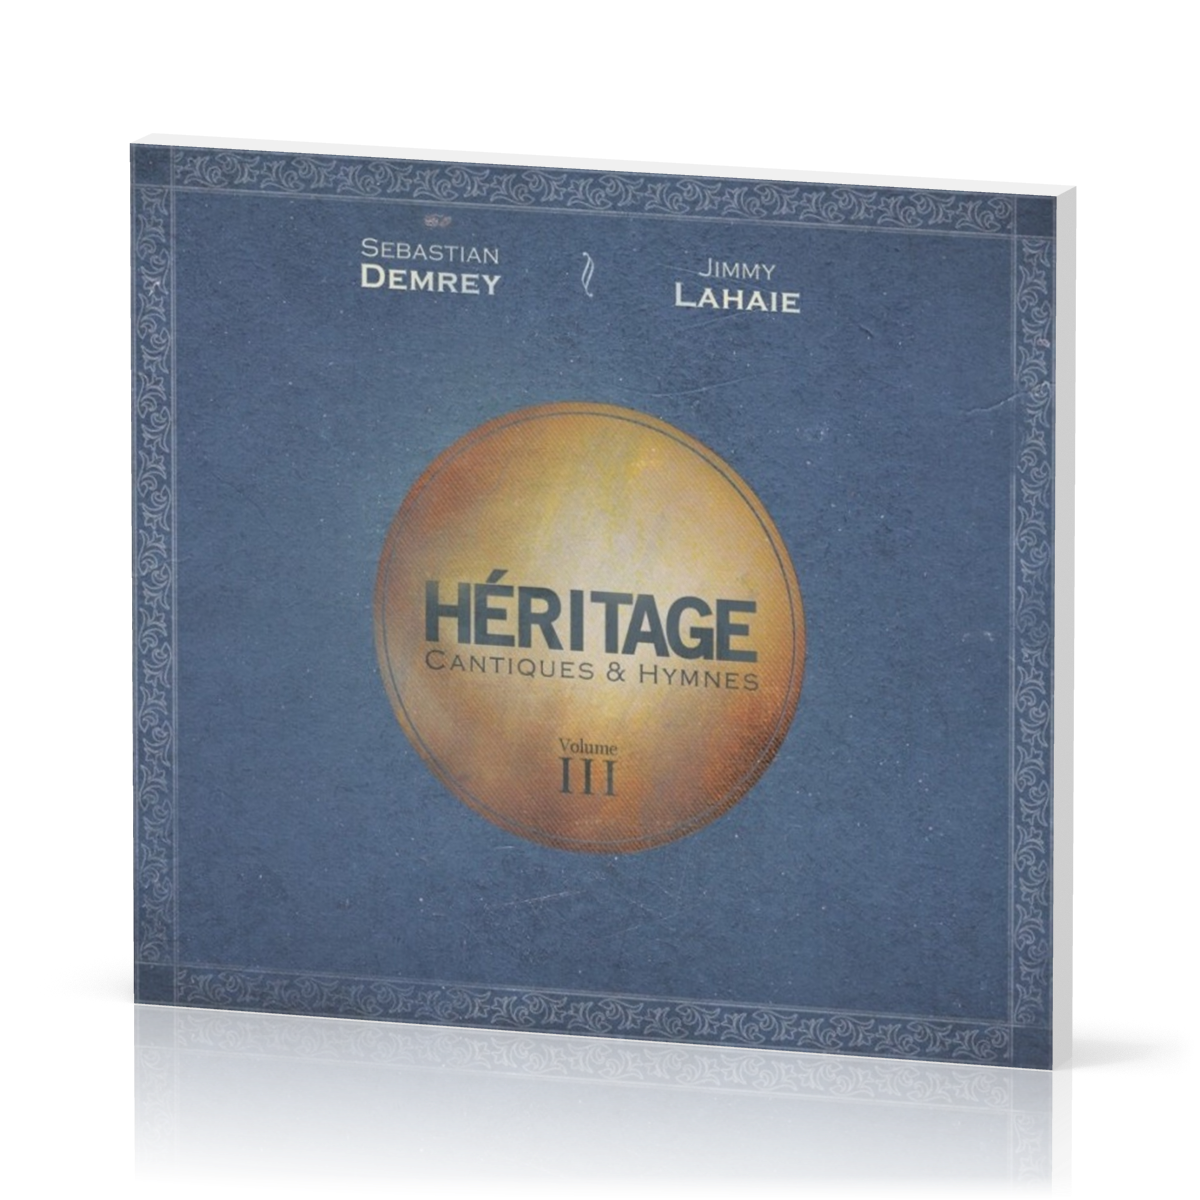 HERITAGE CANTIQUES & HYMNES CD VOL. 3